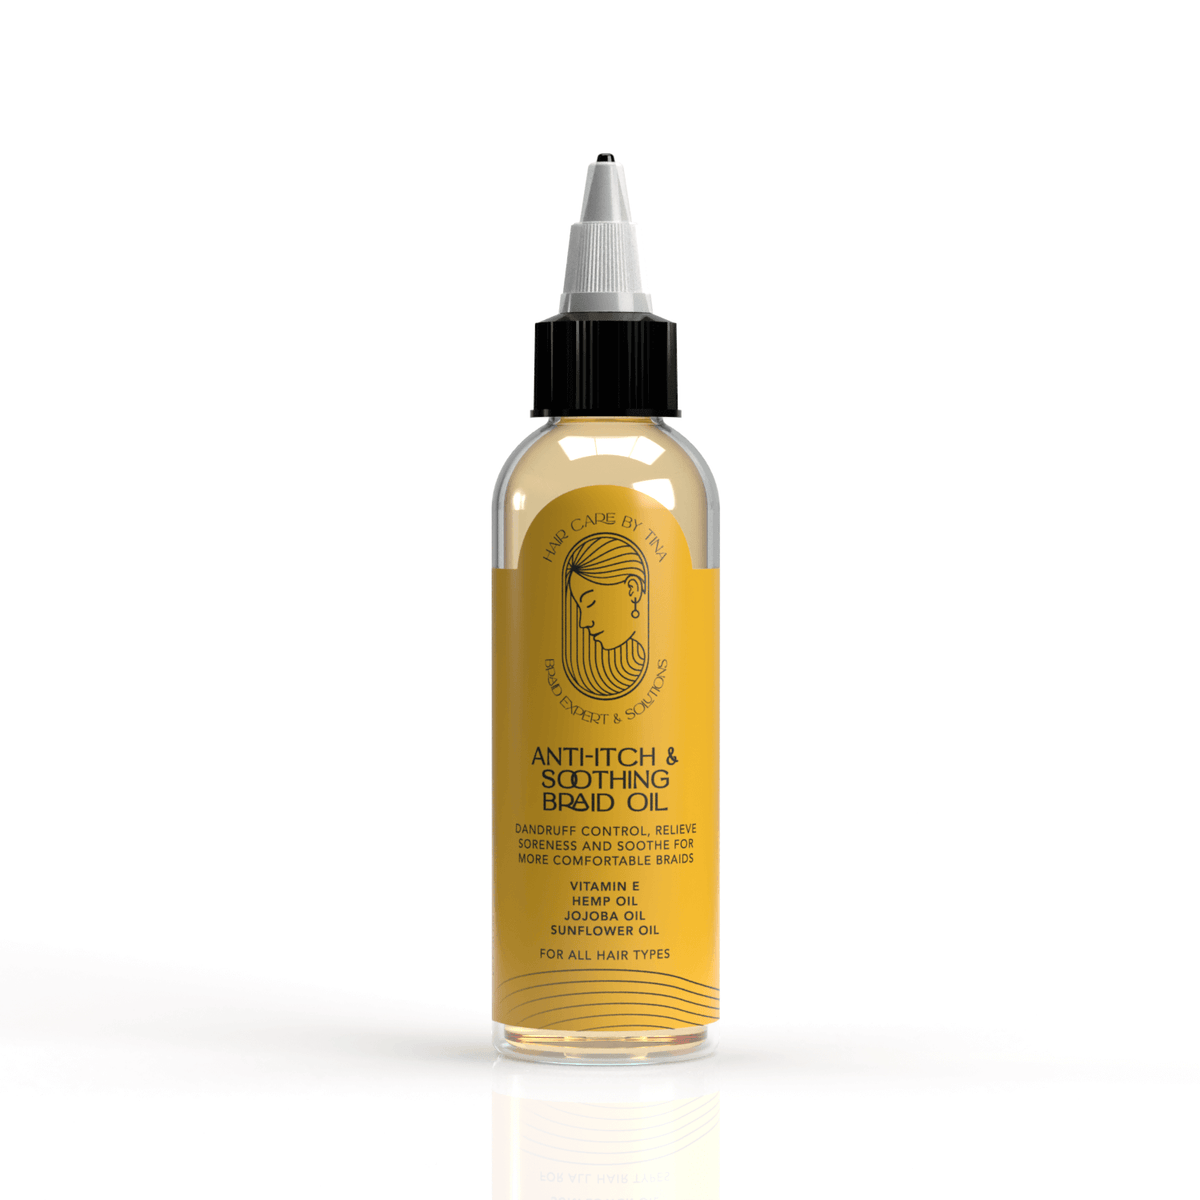 ANTI-ITCH & SOOTHING BRAID OIL – TinaHairCare